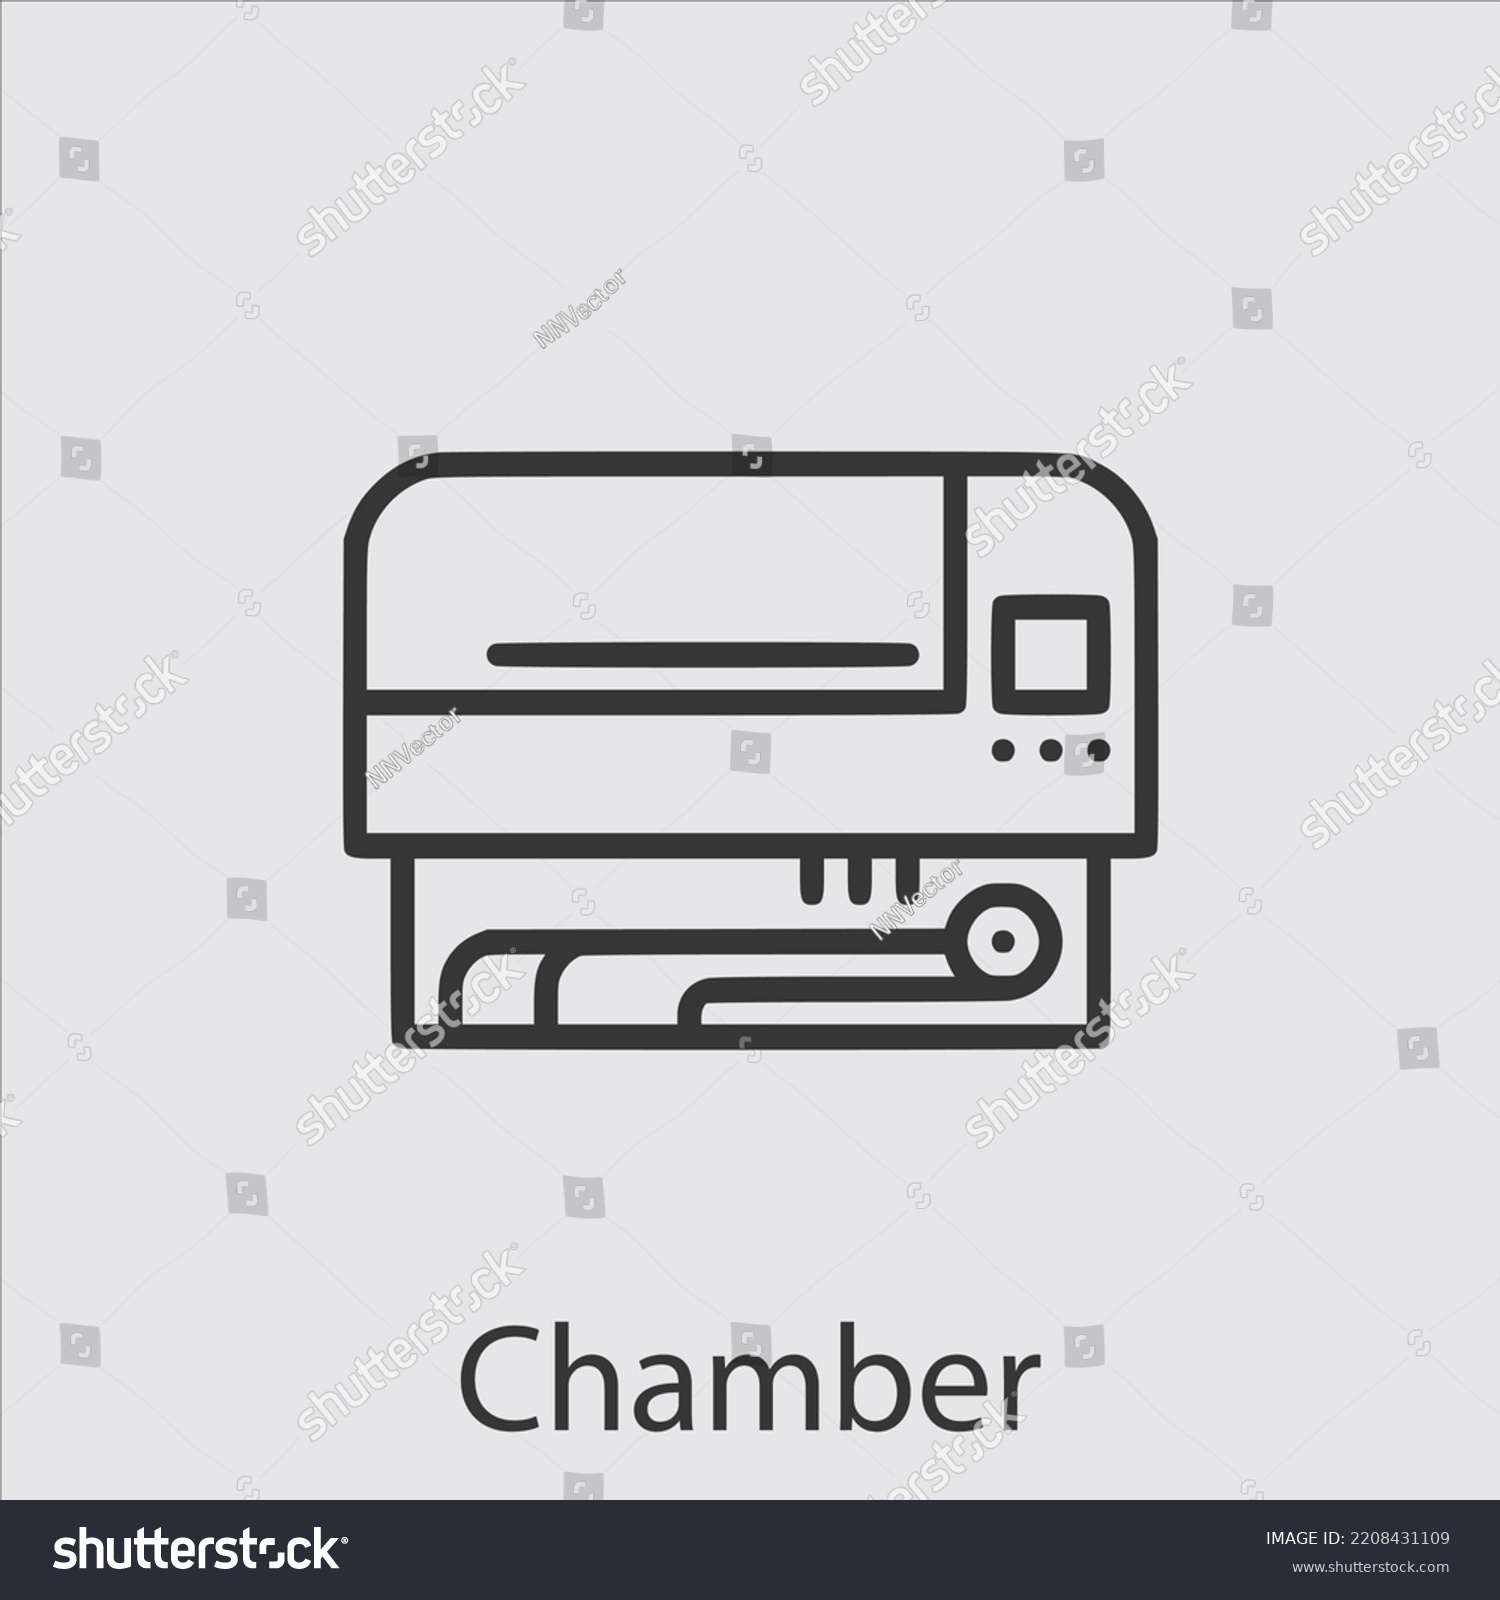 SVG of chamber icon vector icon.Editable stroke.linear style sign for use web design and mobile apps,logo.Symbol illustration.Pixel vector graphics - Vector svg